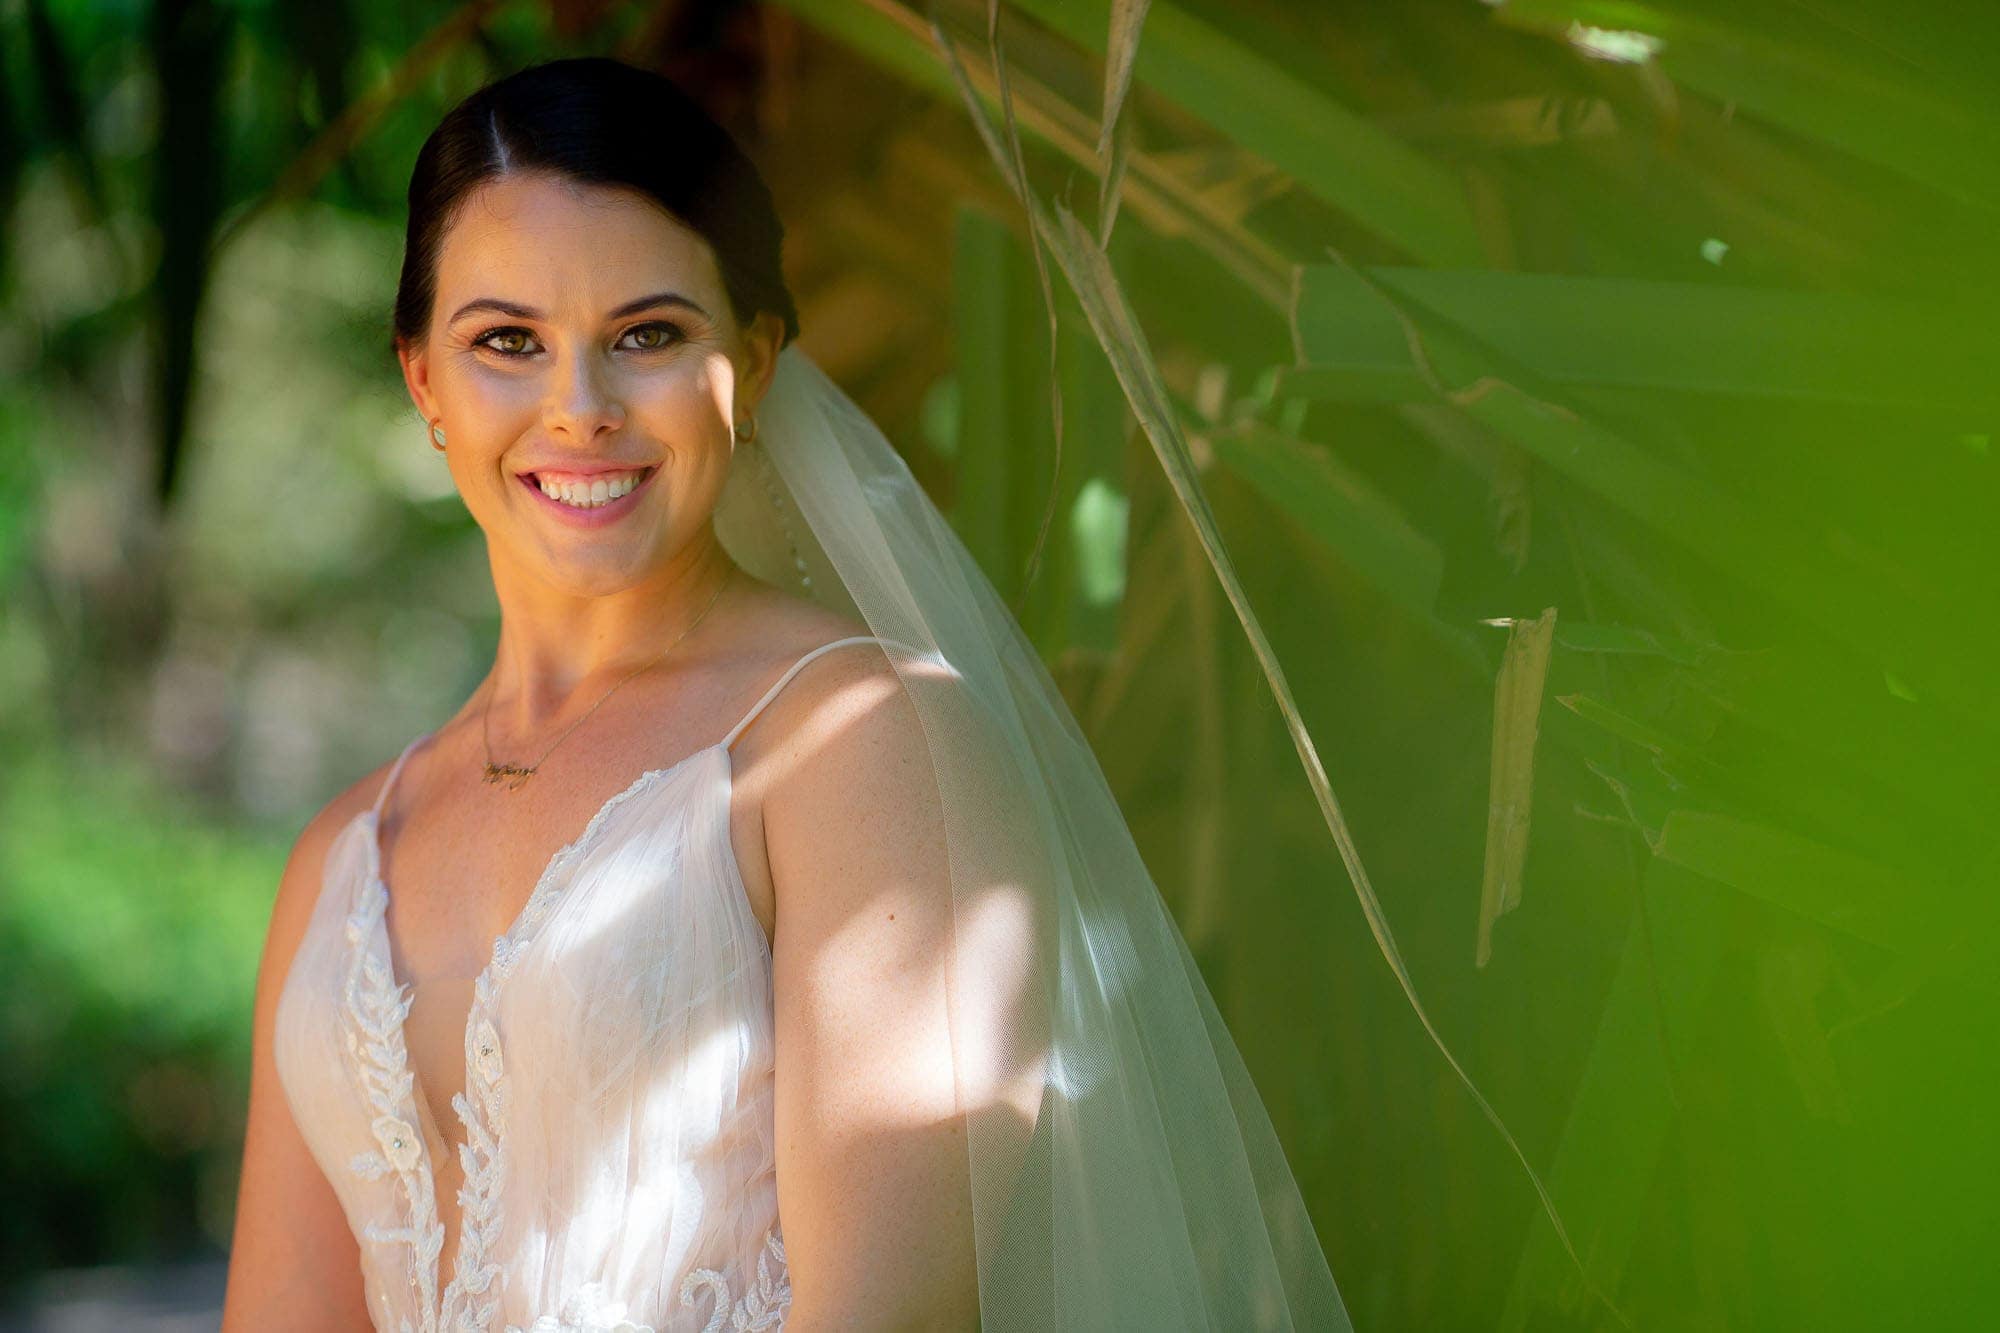 The bride right before tying the knot in Costa Rica